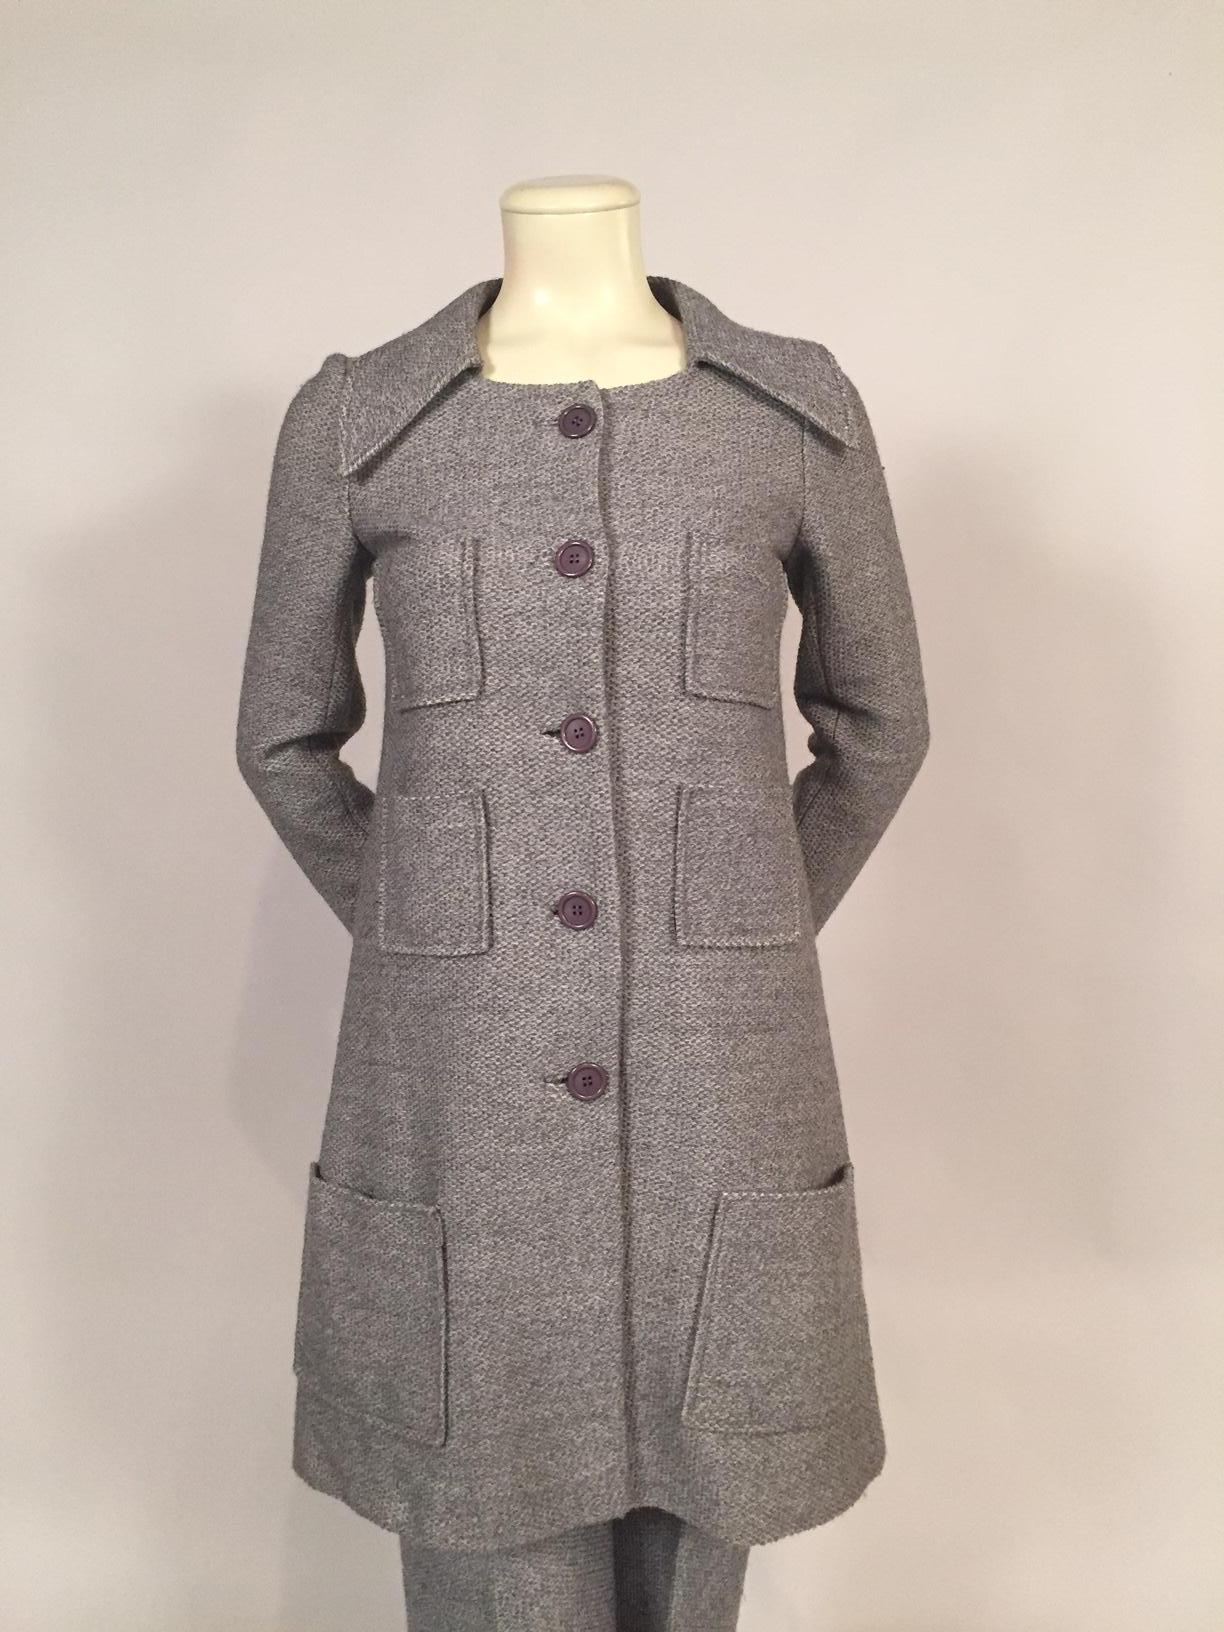 A soft grey wool tweed is used for this coat and pant ensemble from Sonia Rykiel. The coat has six patch pockets, a functional and decorative element.  There are grey buttons and bound buttonholes at the center front and on the cuffs. The coat has a